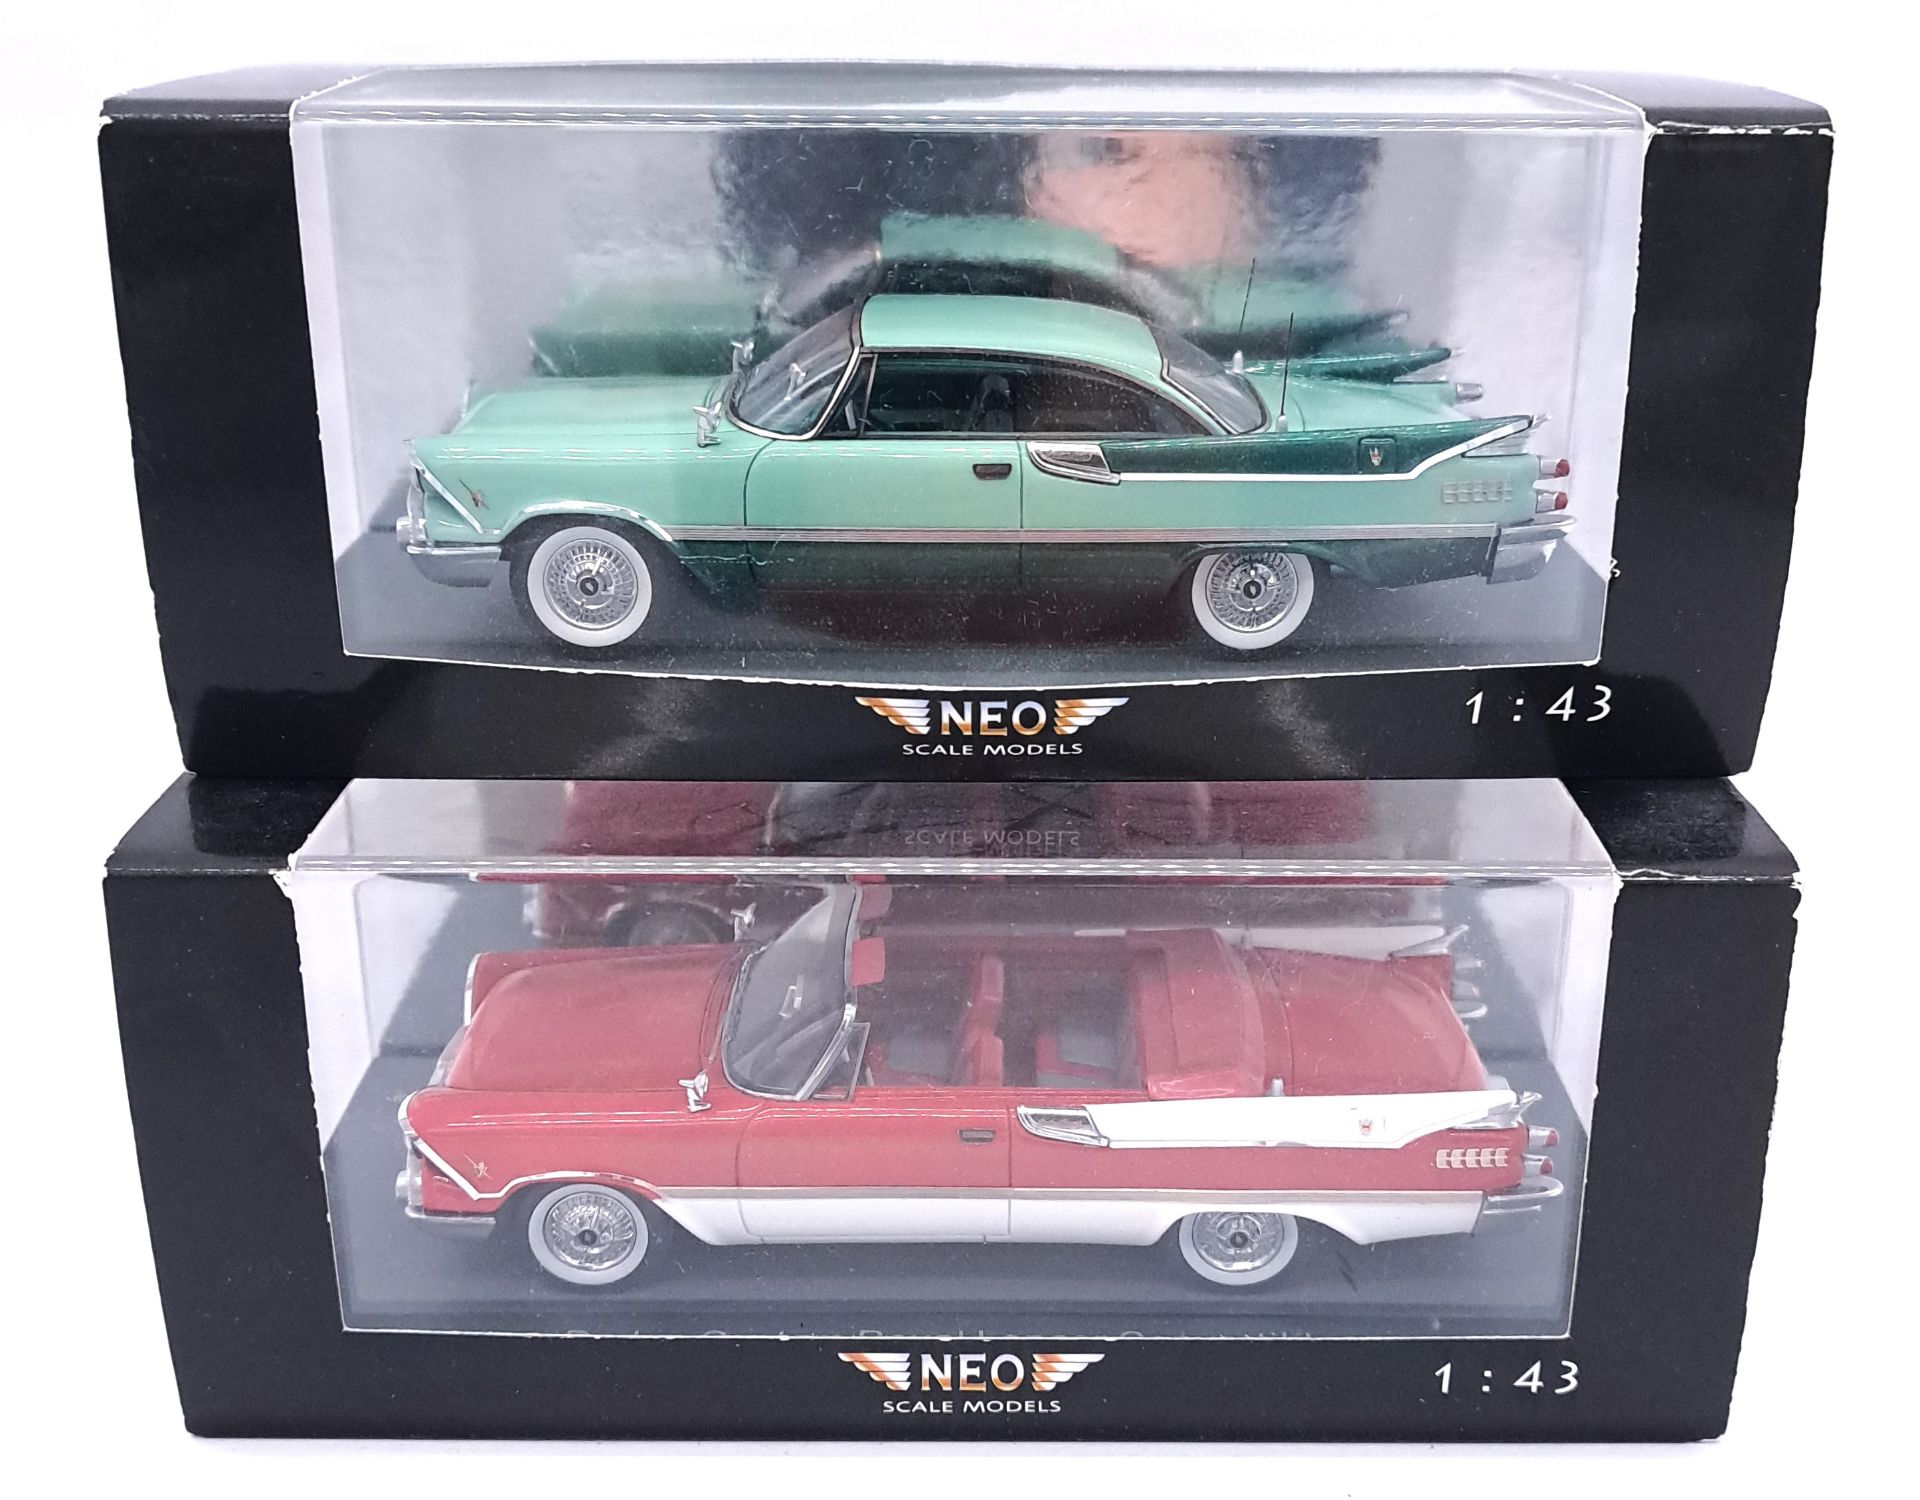 NEO Scale Models, a boxed 1:43 scale pair